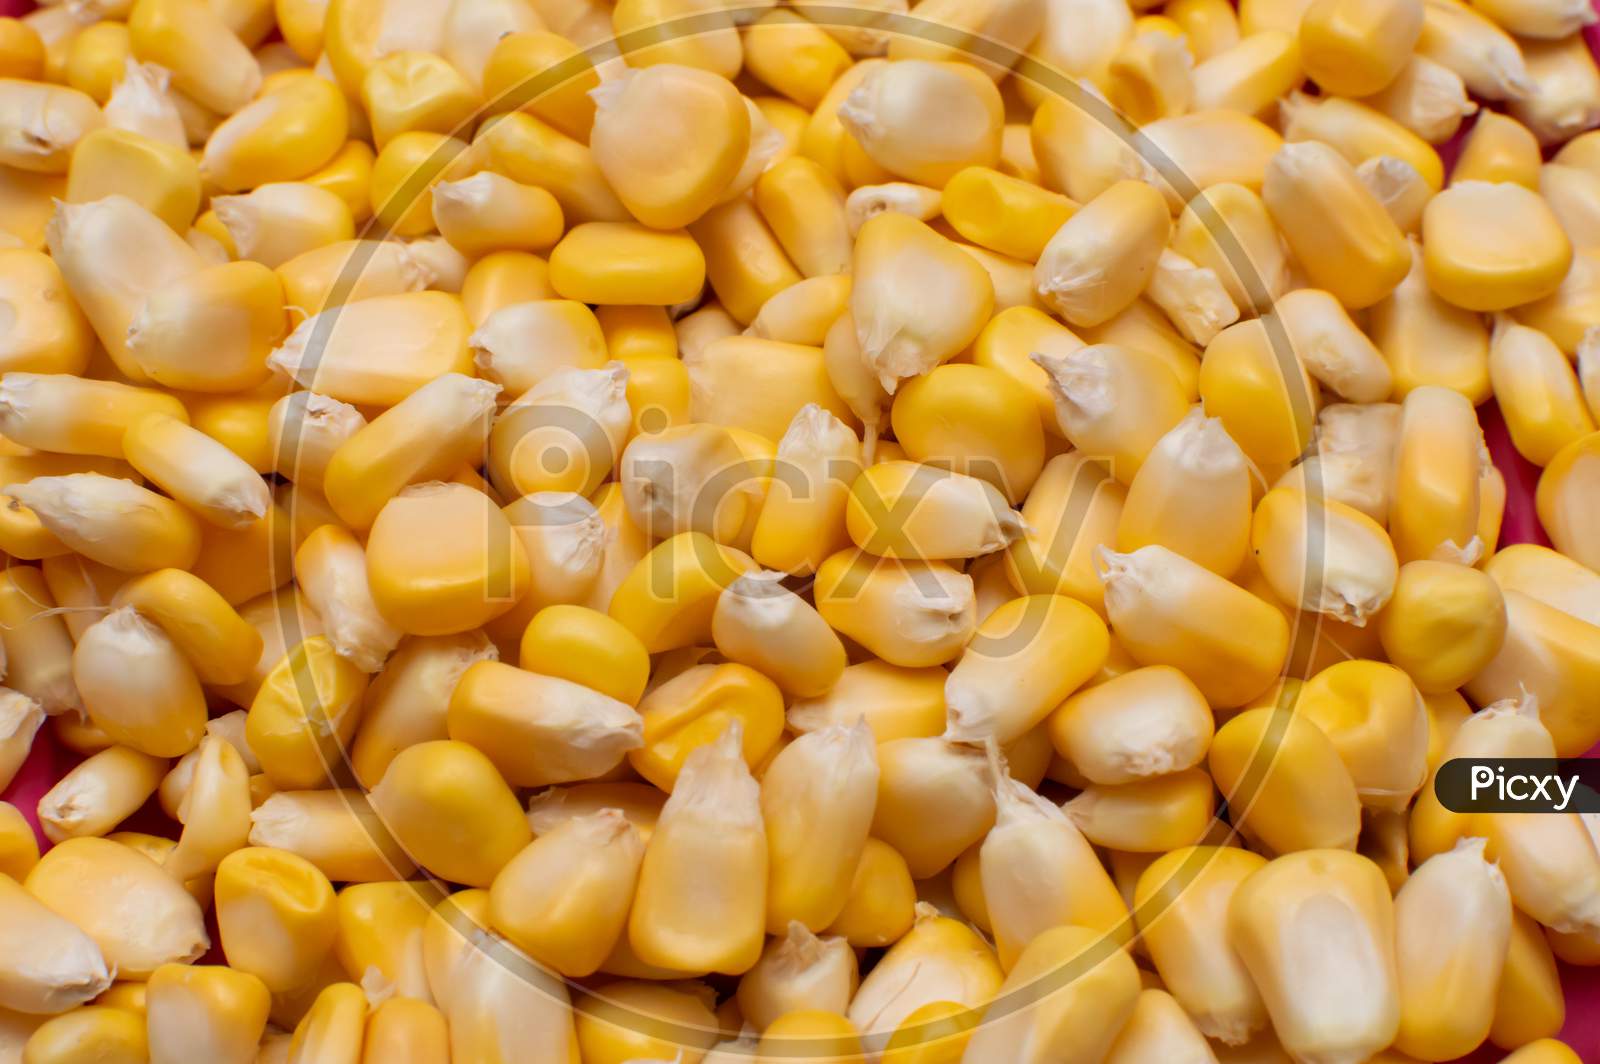 Boiled corns spread across in a container